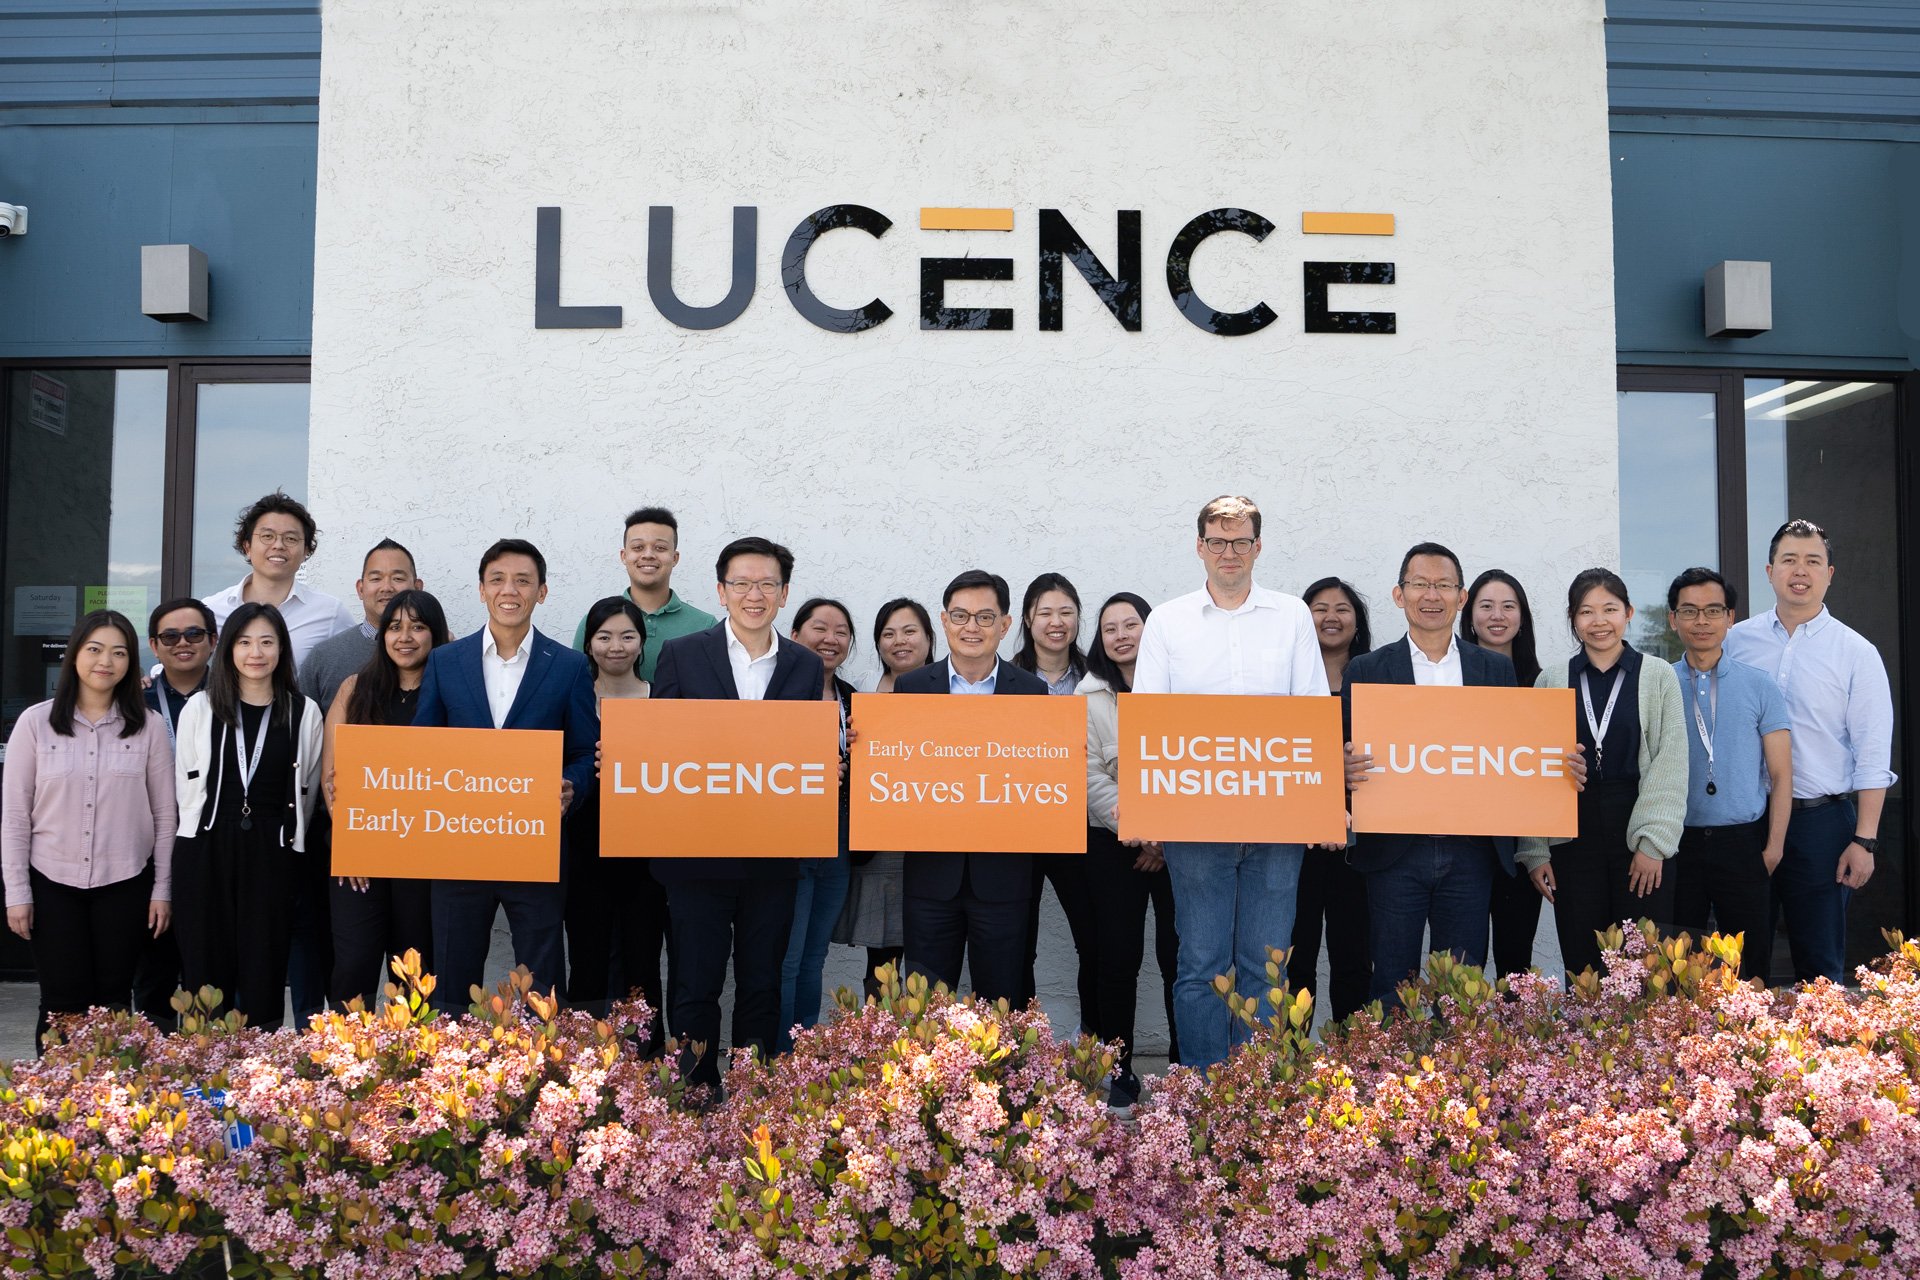 Lucence Launches LucenceINSIGHT to Detect Cancer Earlier